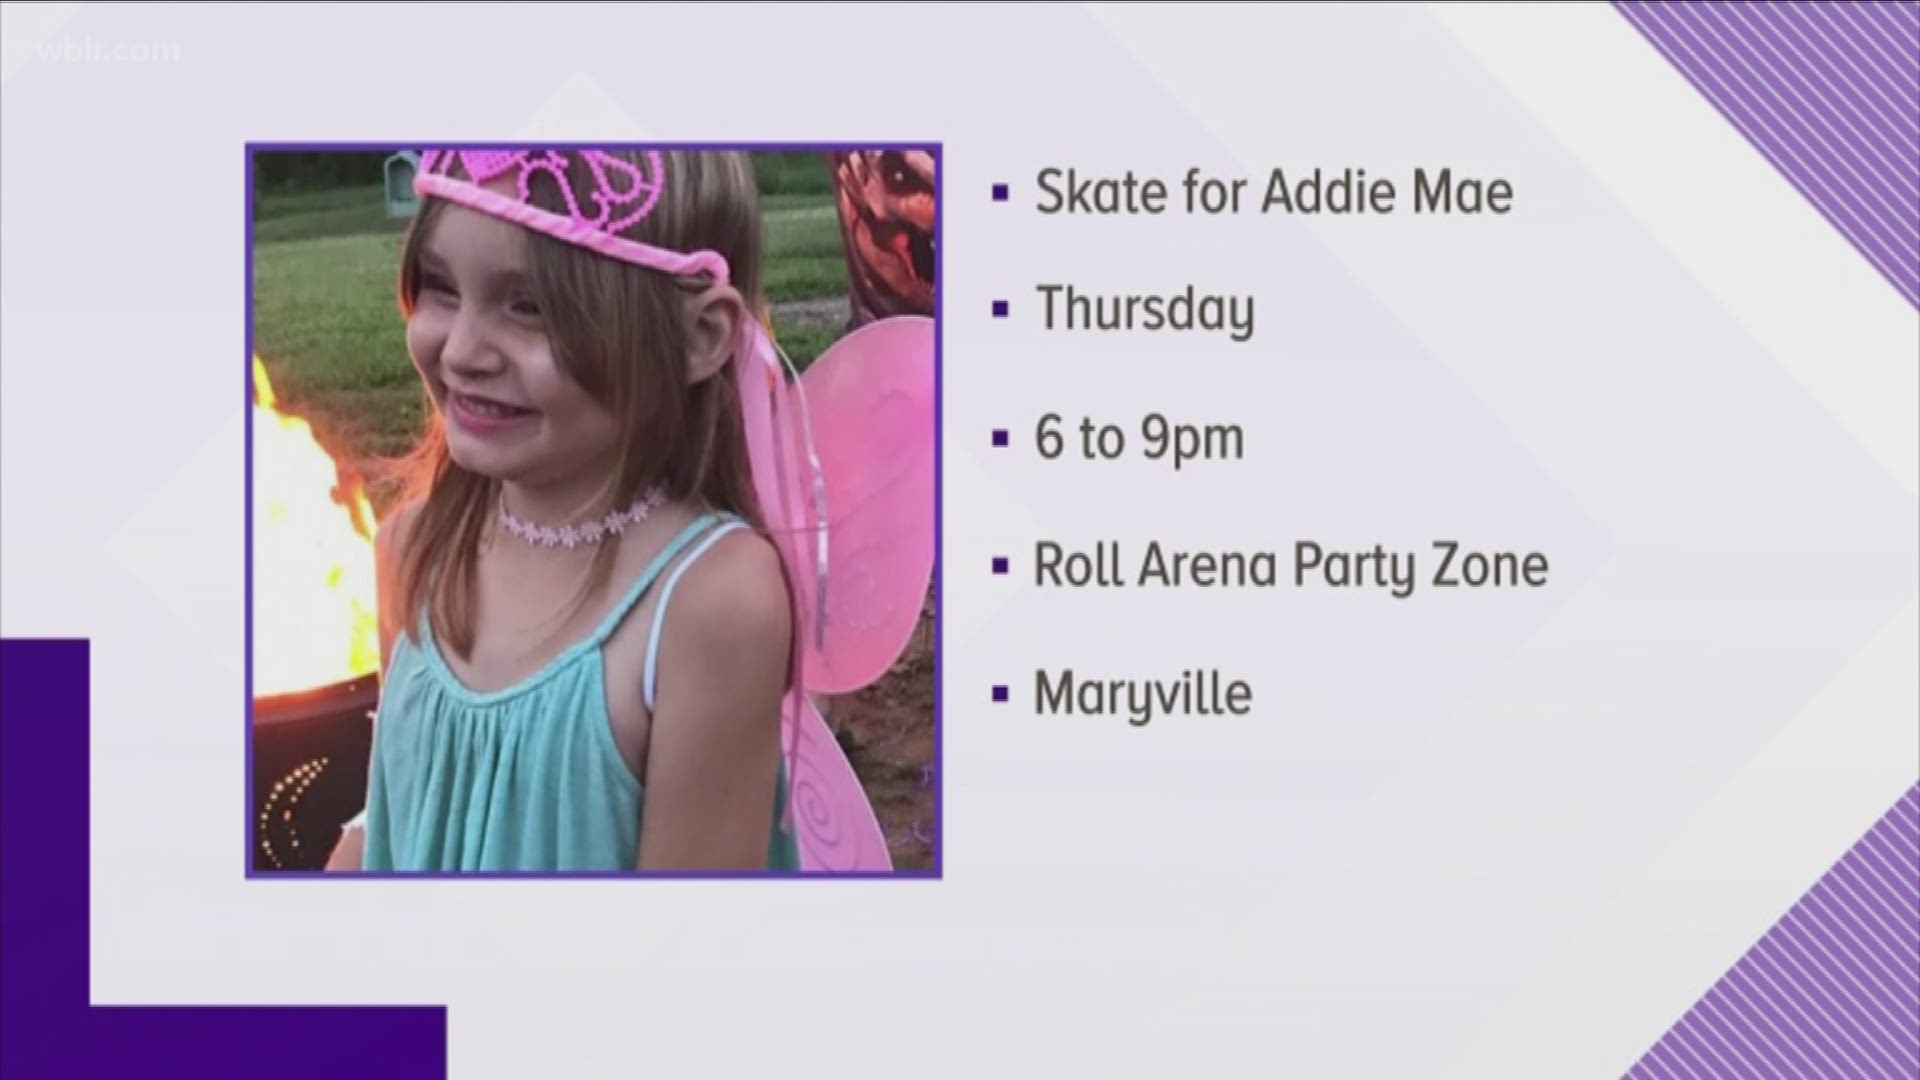 A Skate for Addie Mae (local 8 year old with inoperable brain tumor). Event is Dec. 13 at 6pm at Roll Arena party Zone in Maryville. $10 entry, $30 max for a family of three or more.  Dec. 11, 2018-4pm